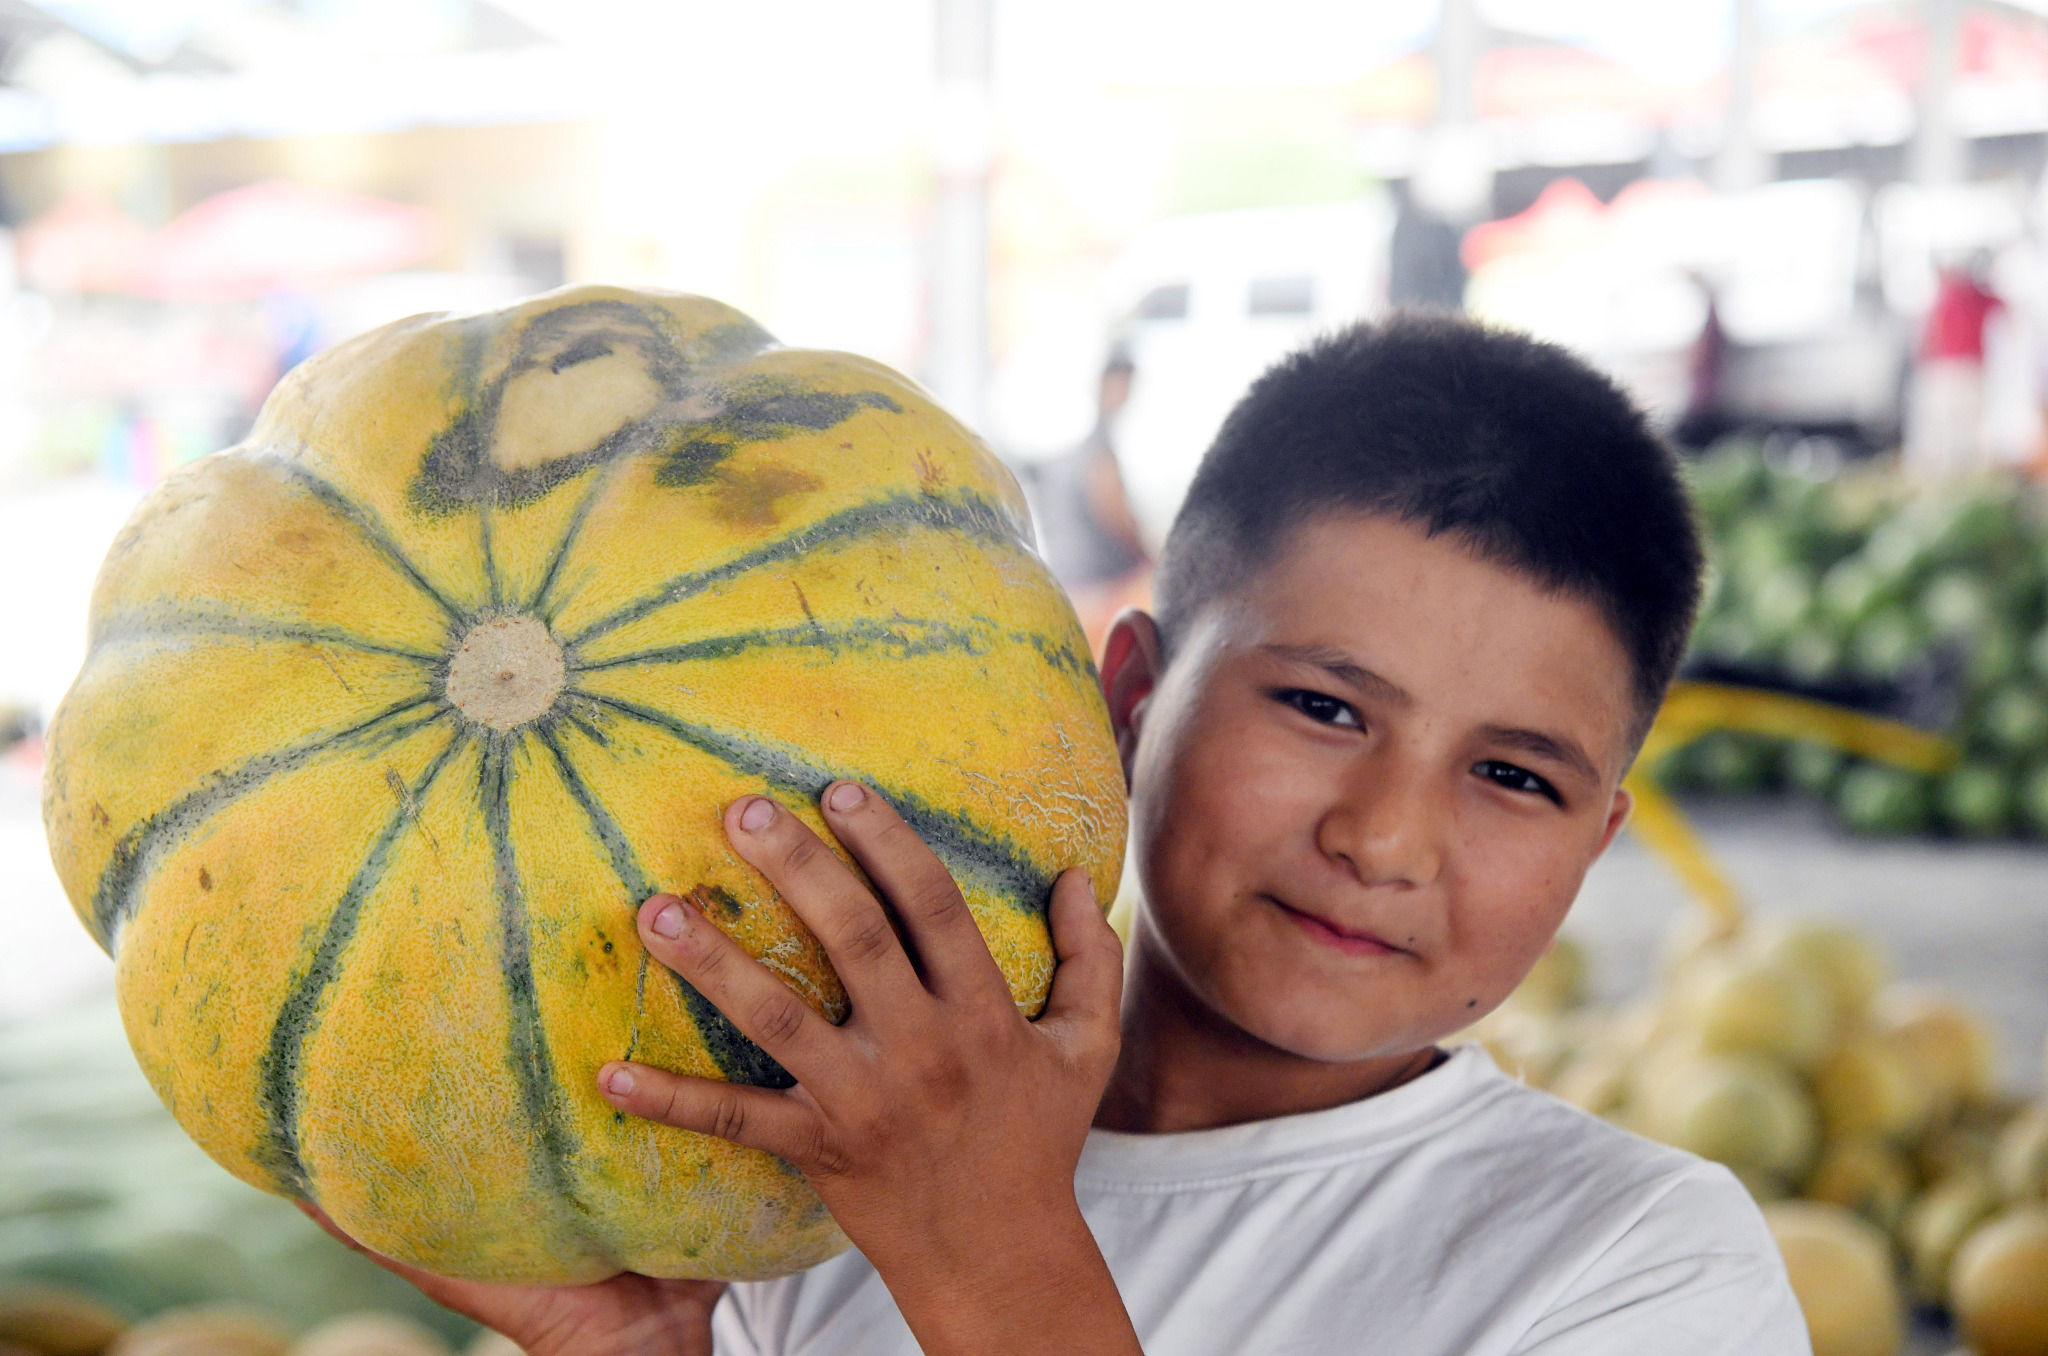 A boy holds a giant melon at a wholesale market in Kashgar, northwest China's Xinjiang Uygur Autonomous Region. /CFP